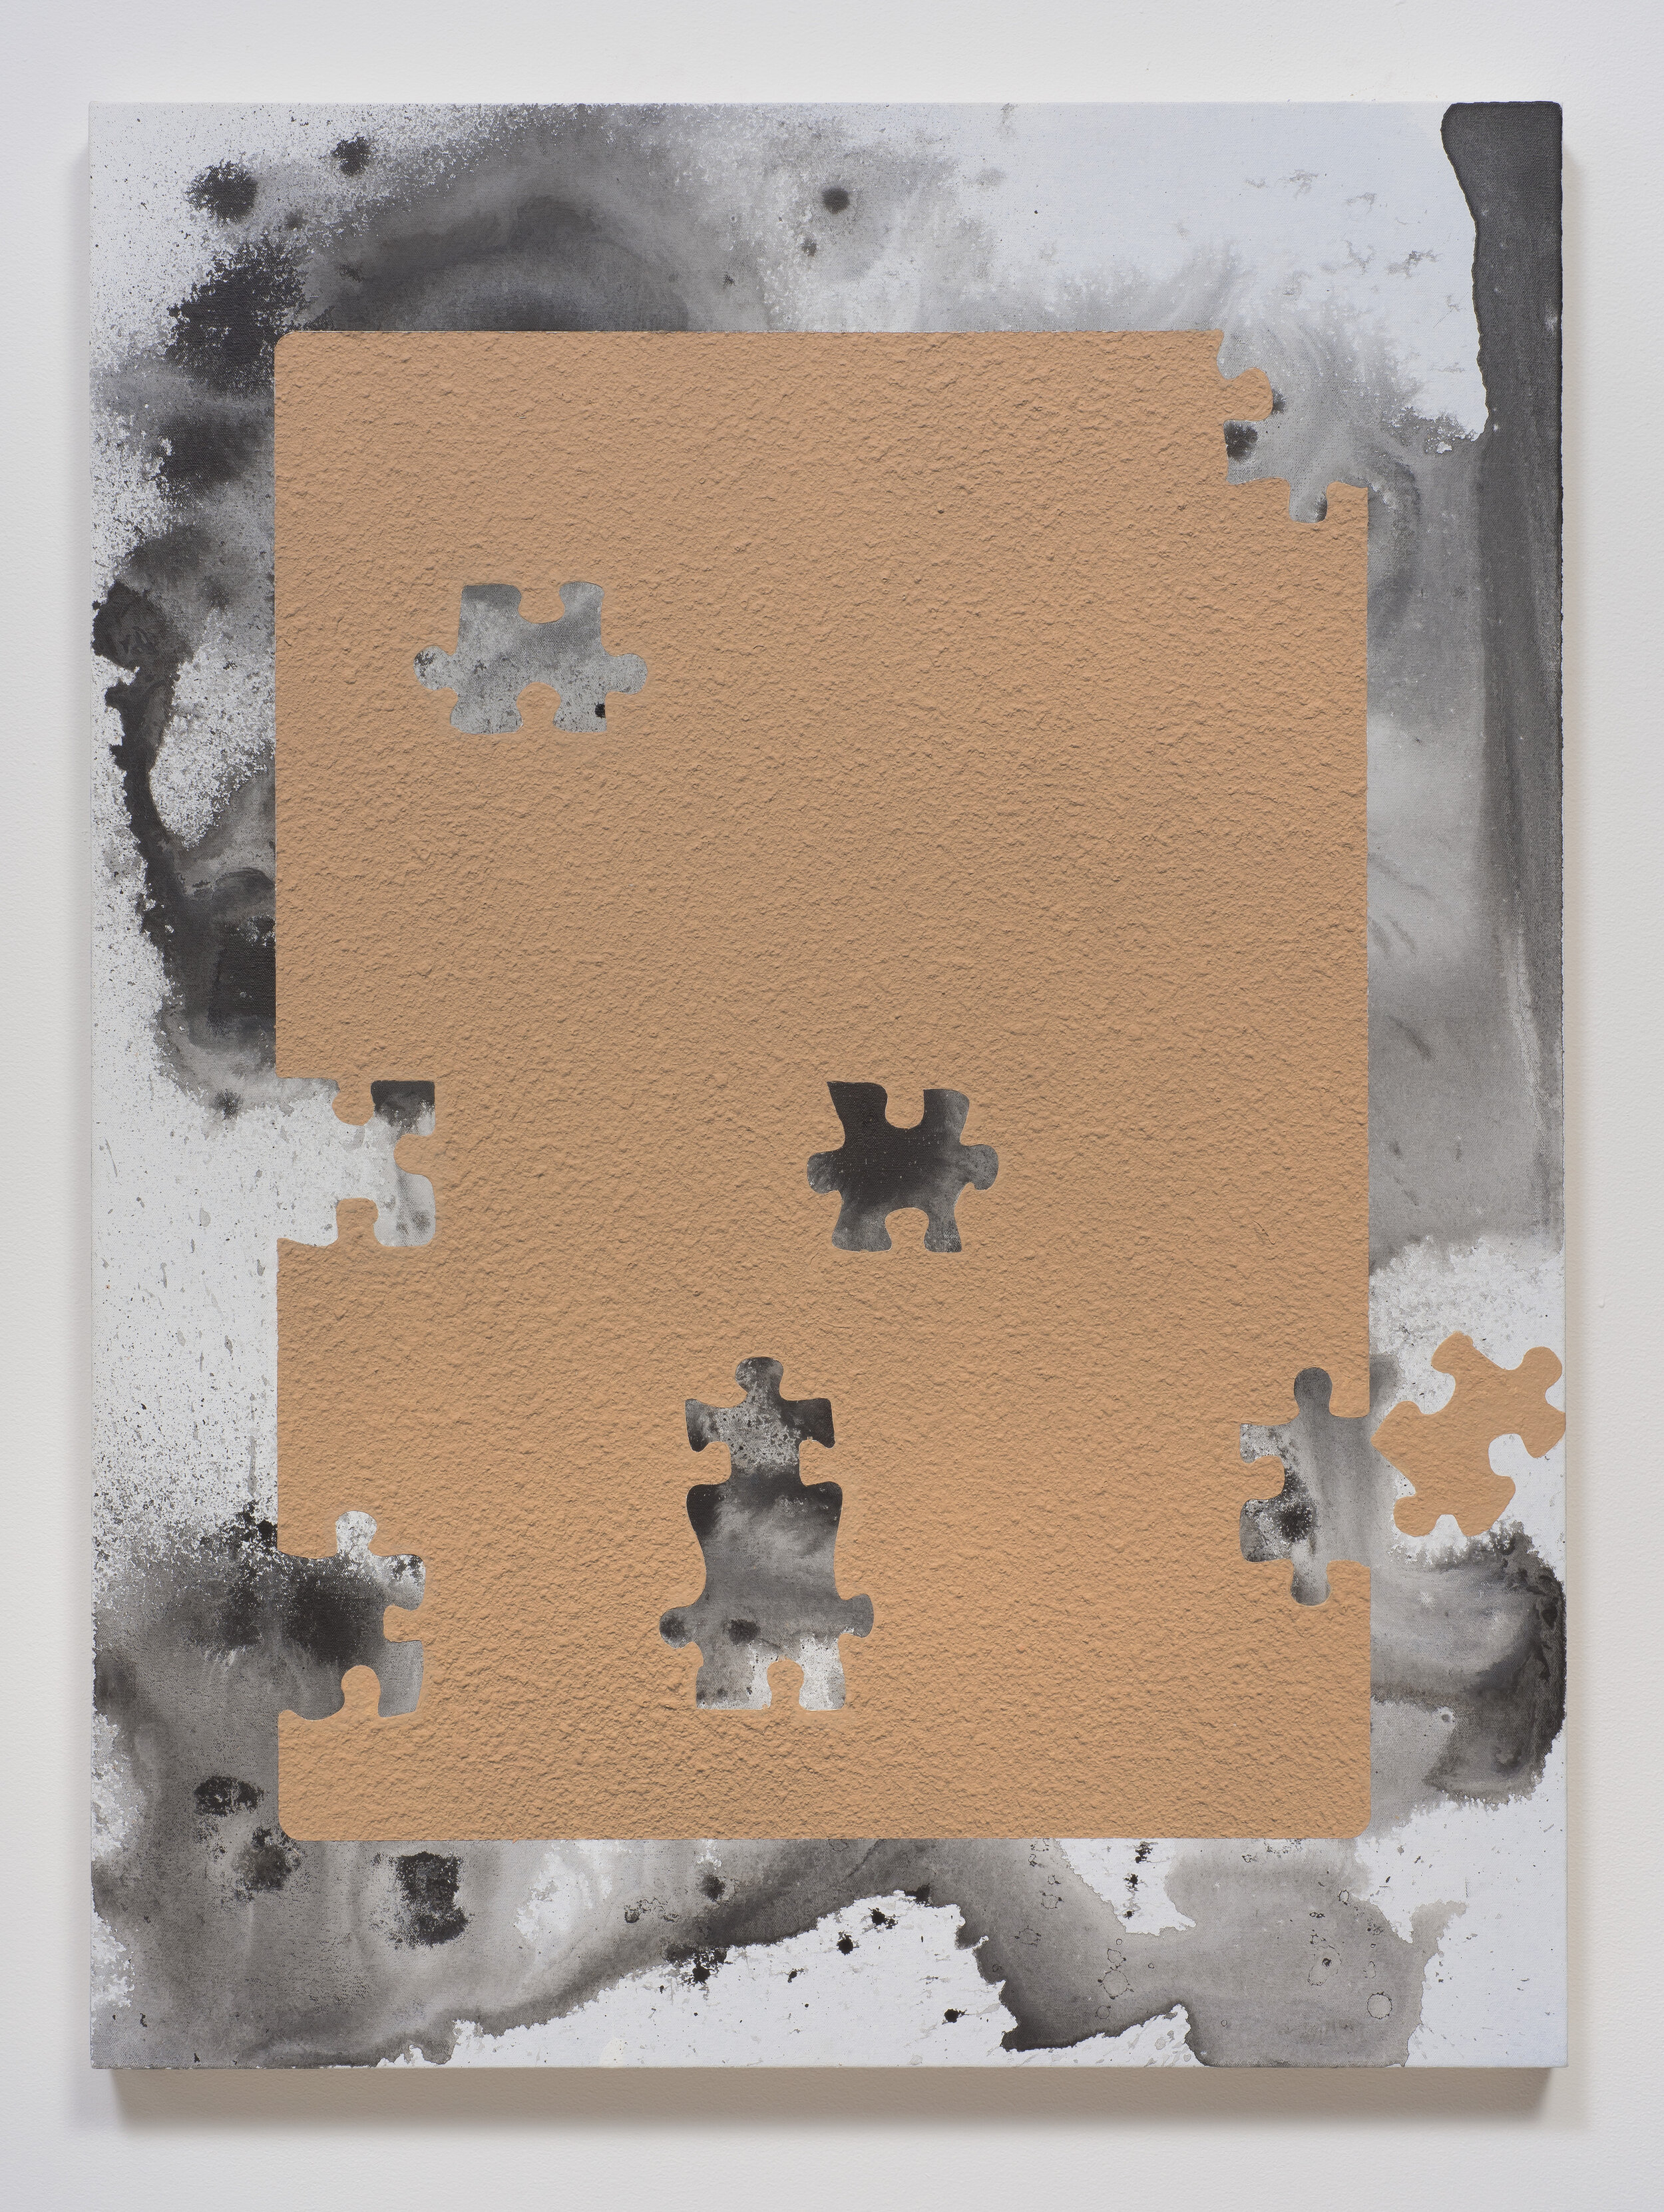   Untitled Painting with Puzzle Motif II,  2014. Acrylic on canvas. 40 x 30 inches 